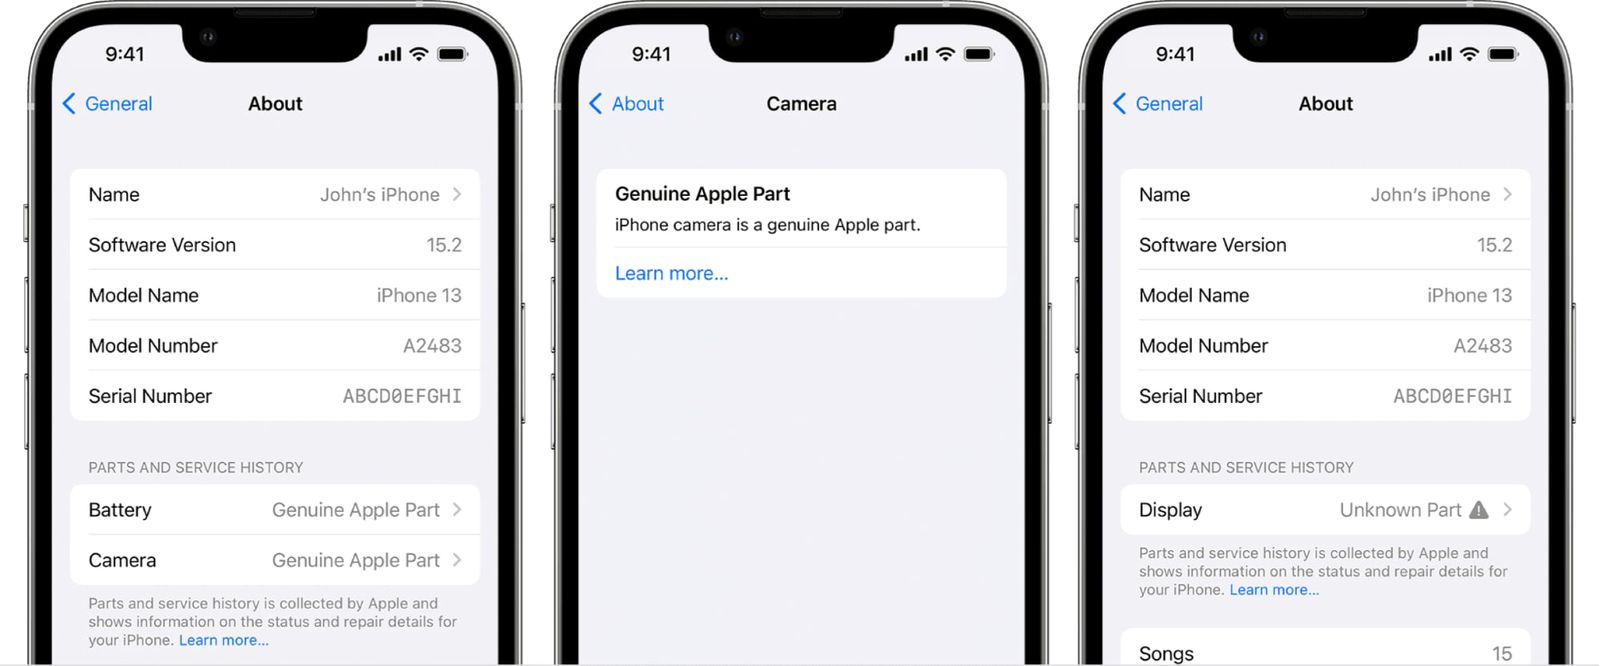 iOS 15.2 Adds 'Parts and Service History' Feature to iPhone - MacRumors